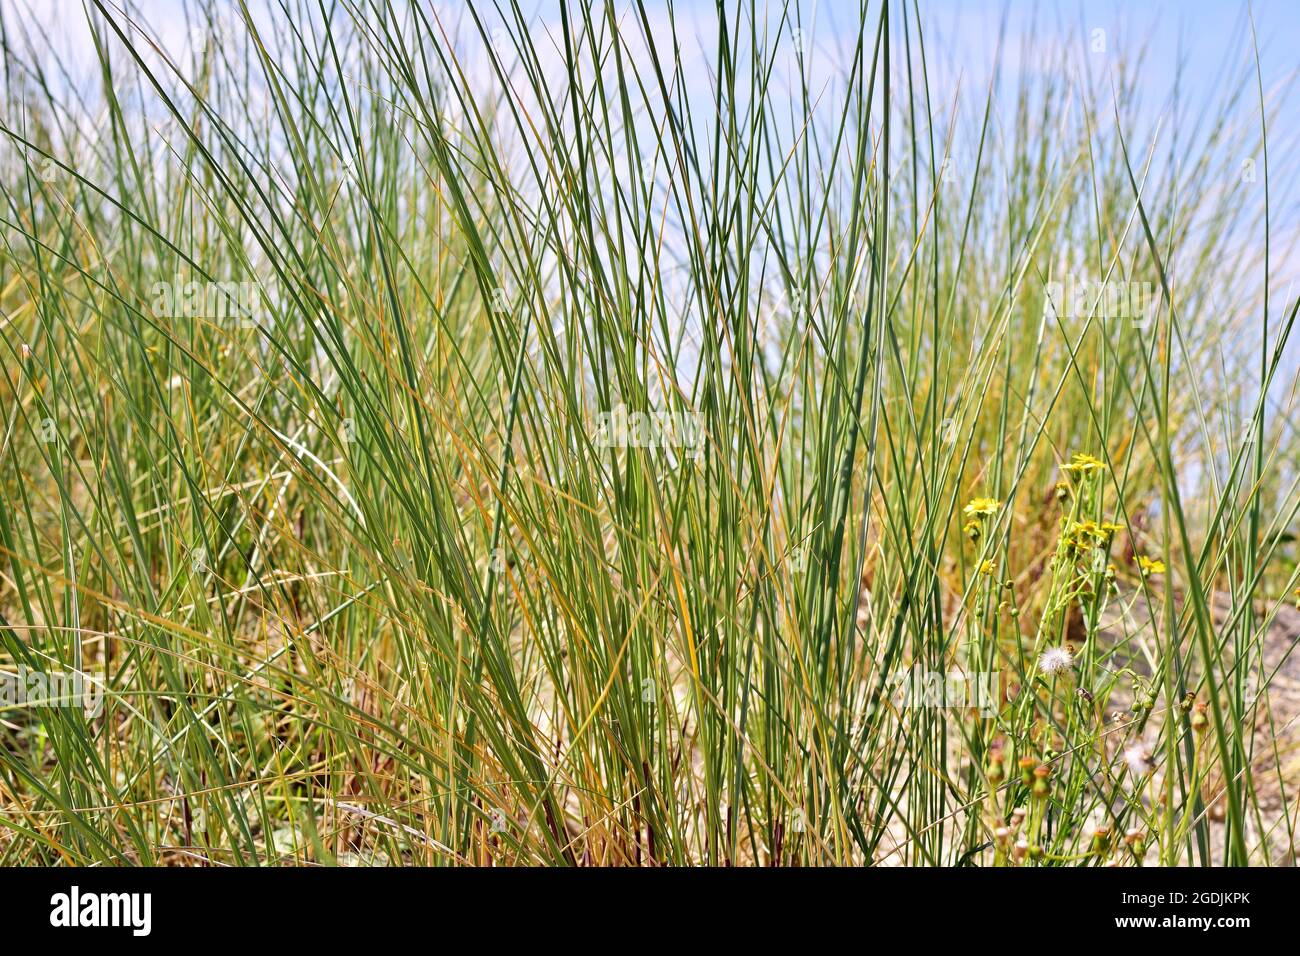 Green grasses at the beach as a close up Stock Photo